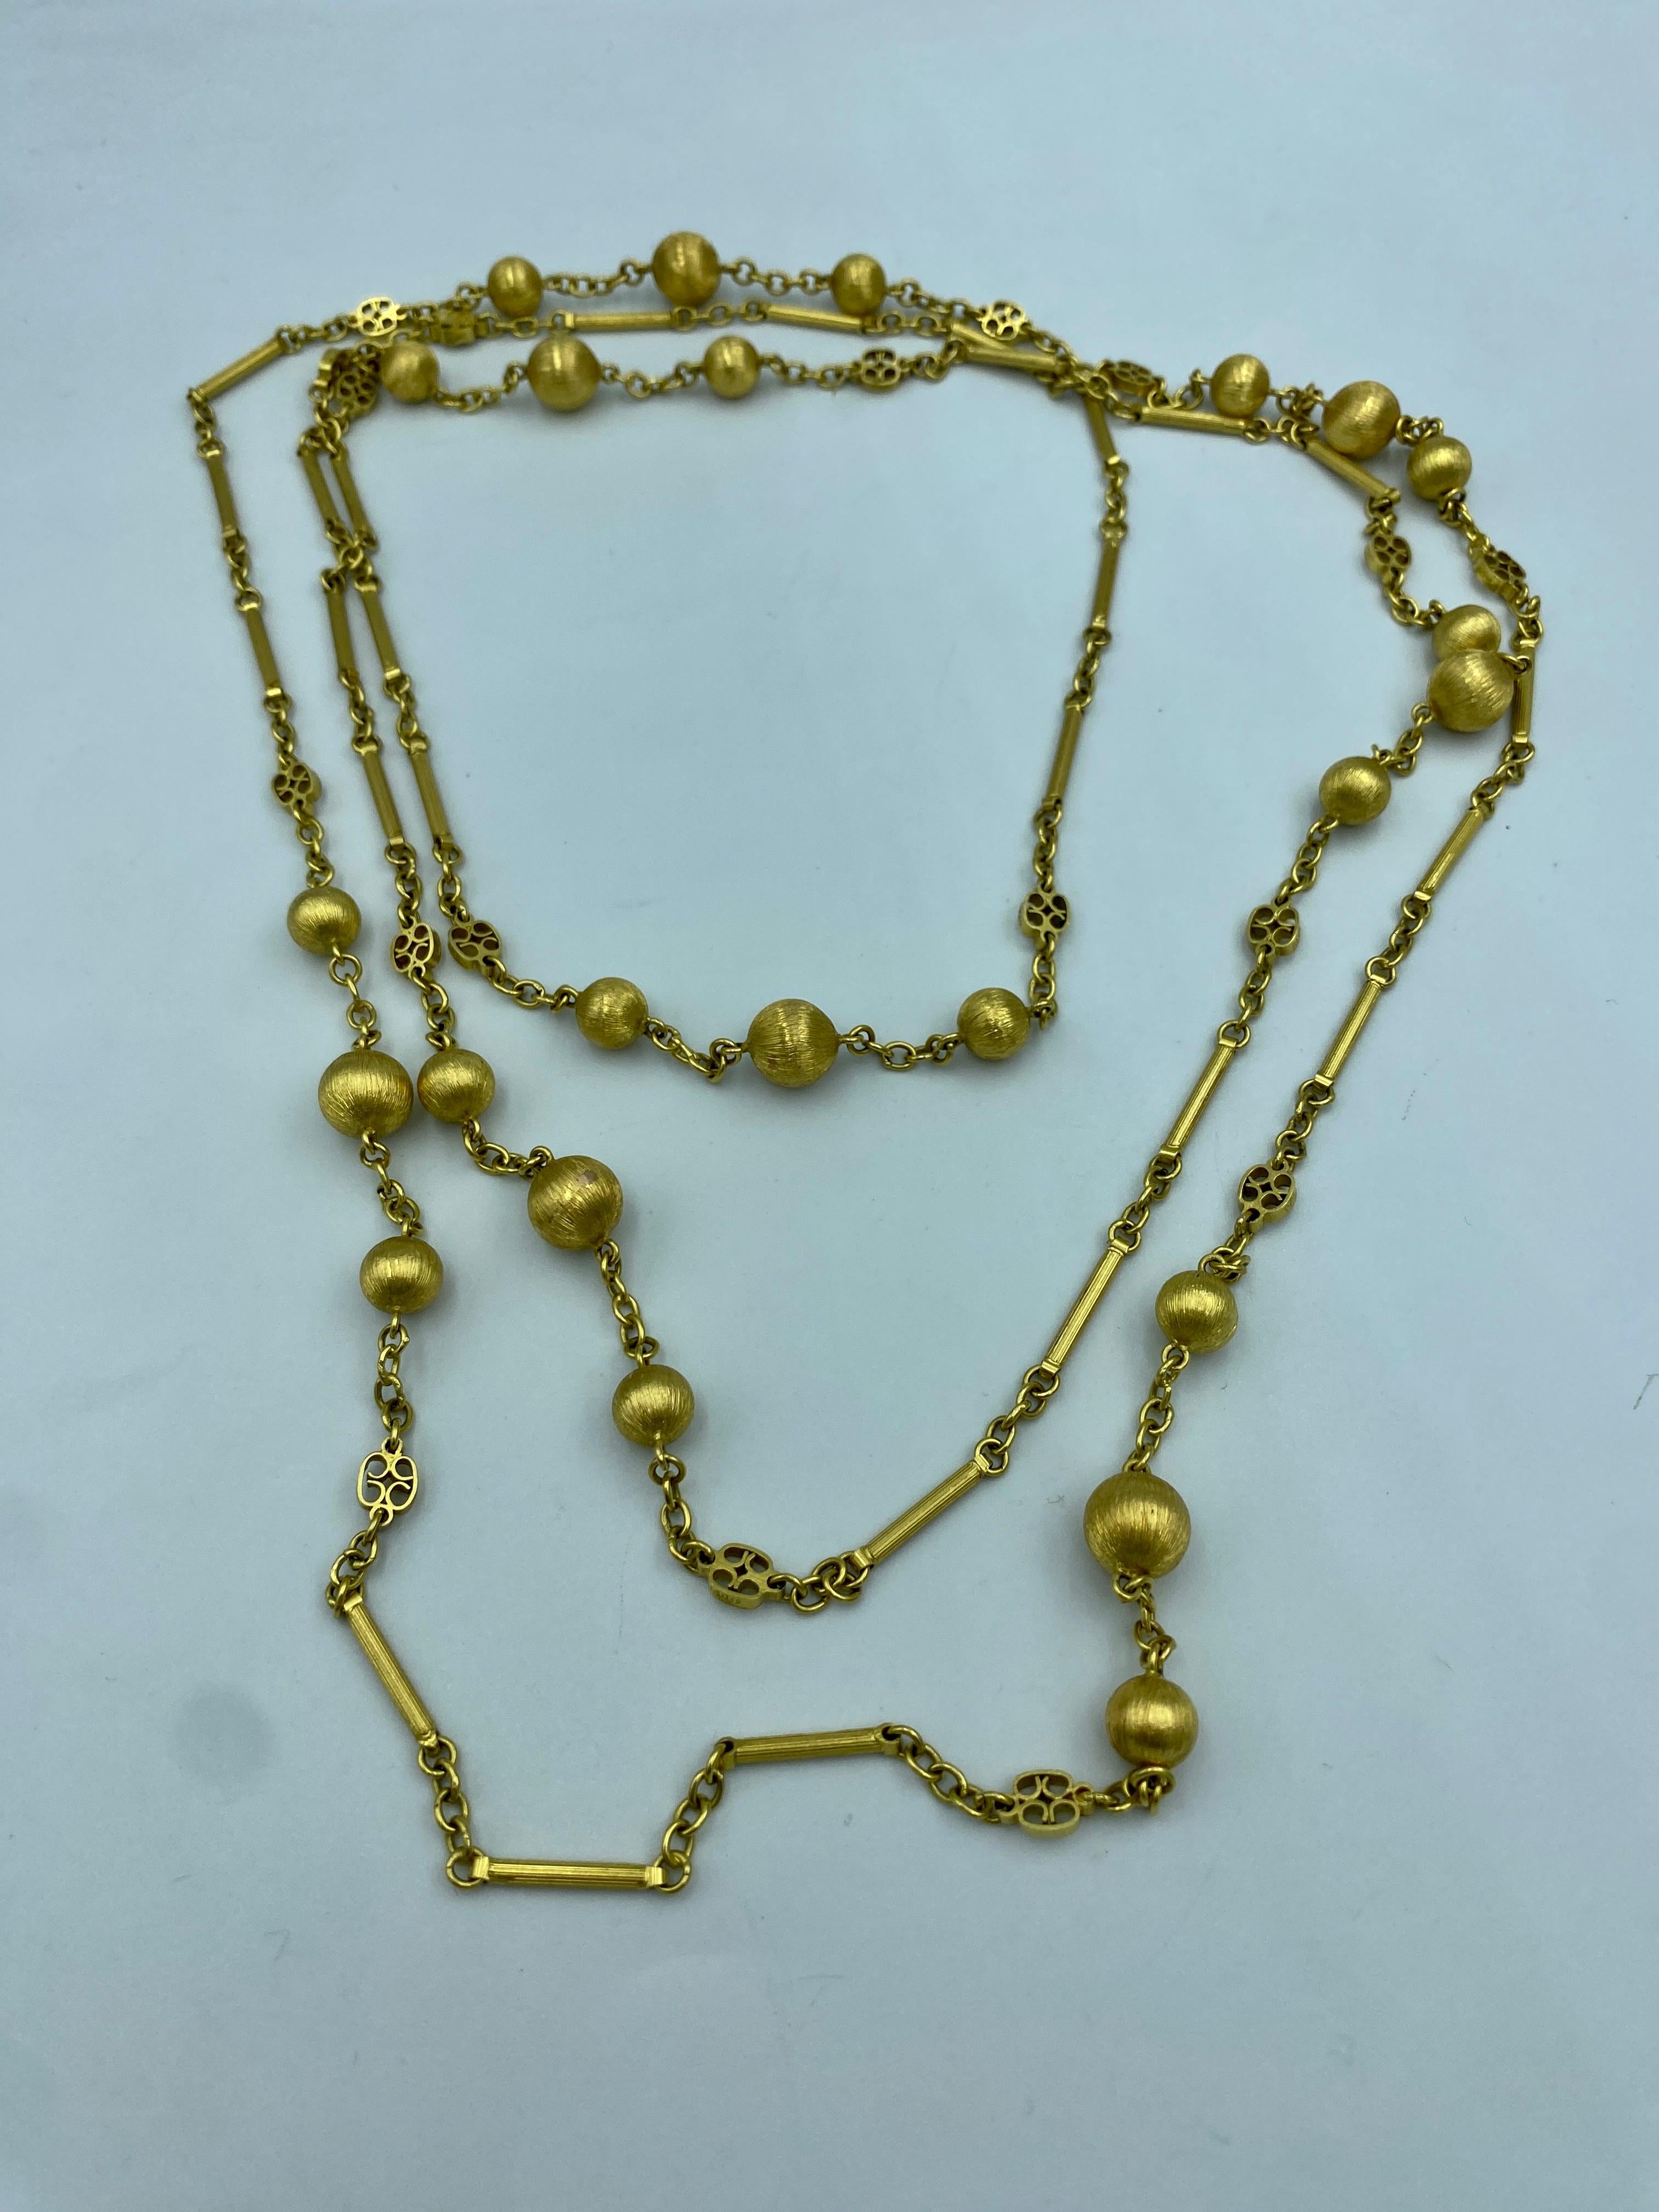 The craftsmanship on this very long 18k gold necklace is quite remarkable. The chain is adorned with a repetition of balls and tubes all of which have been hand engraved to give them their texture. This chain is long enough to be worn as a 2,3 or 4